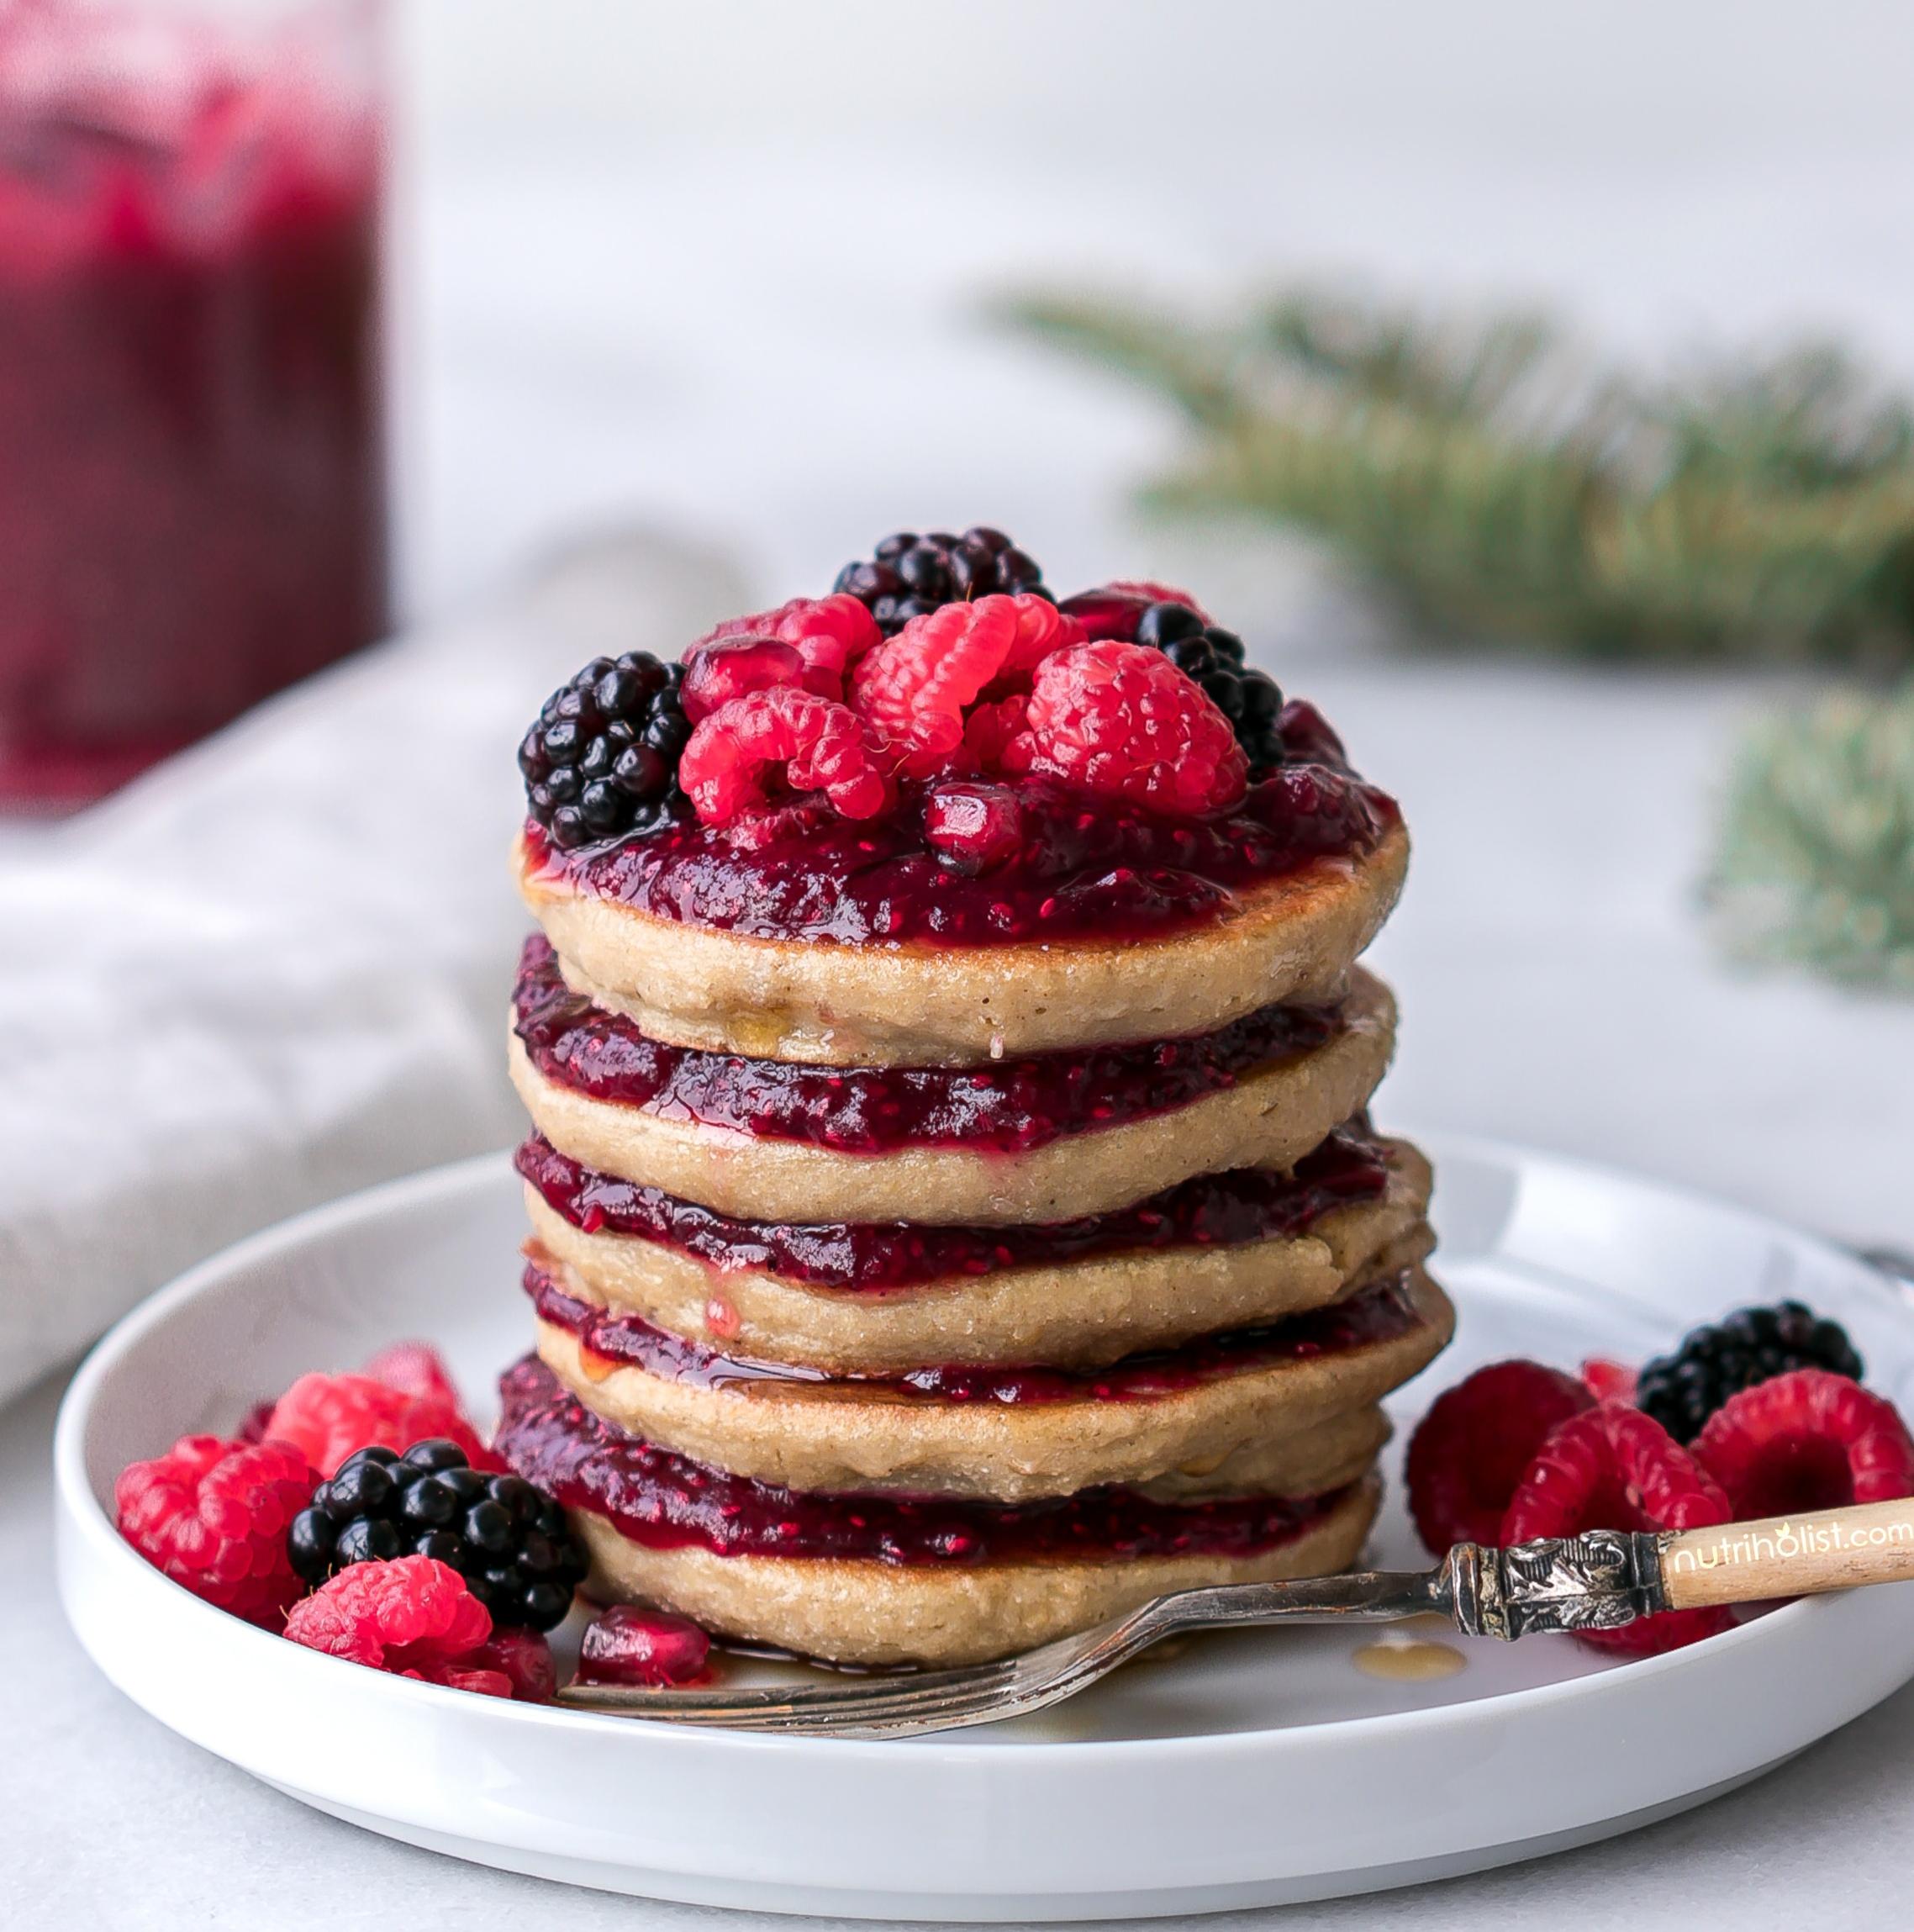  Who says gluten-free pancakes can't be delicious? These quinoa pancakes are here to prove you wrong.